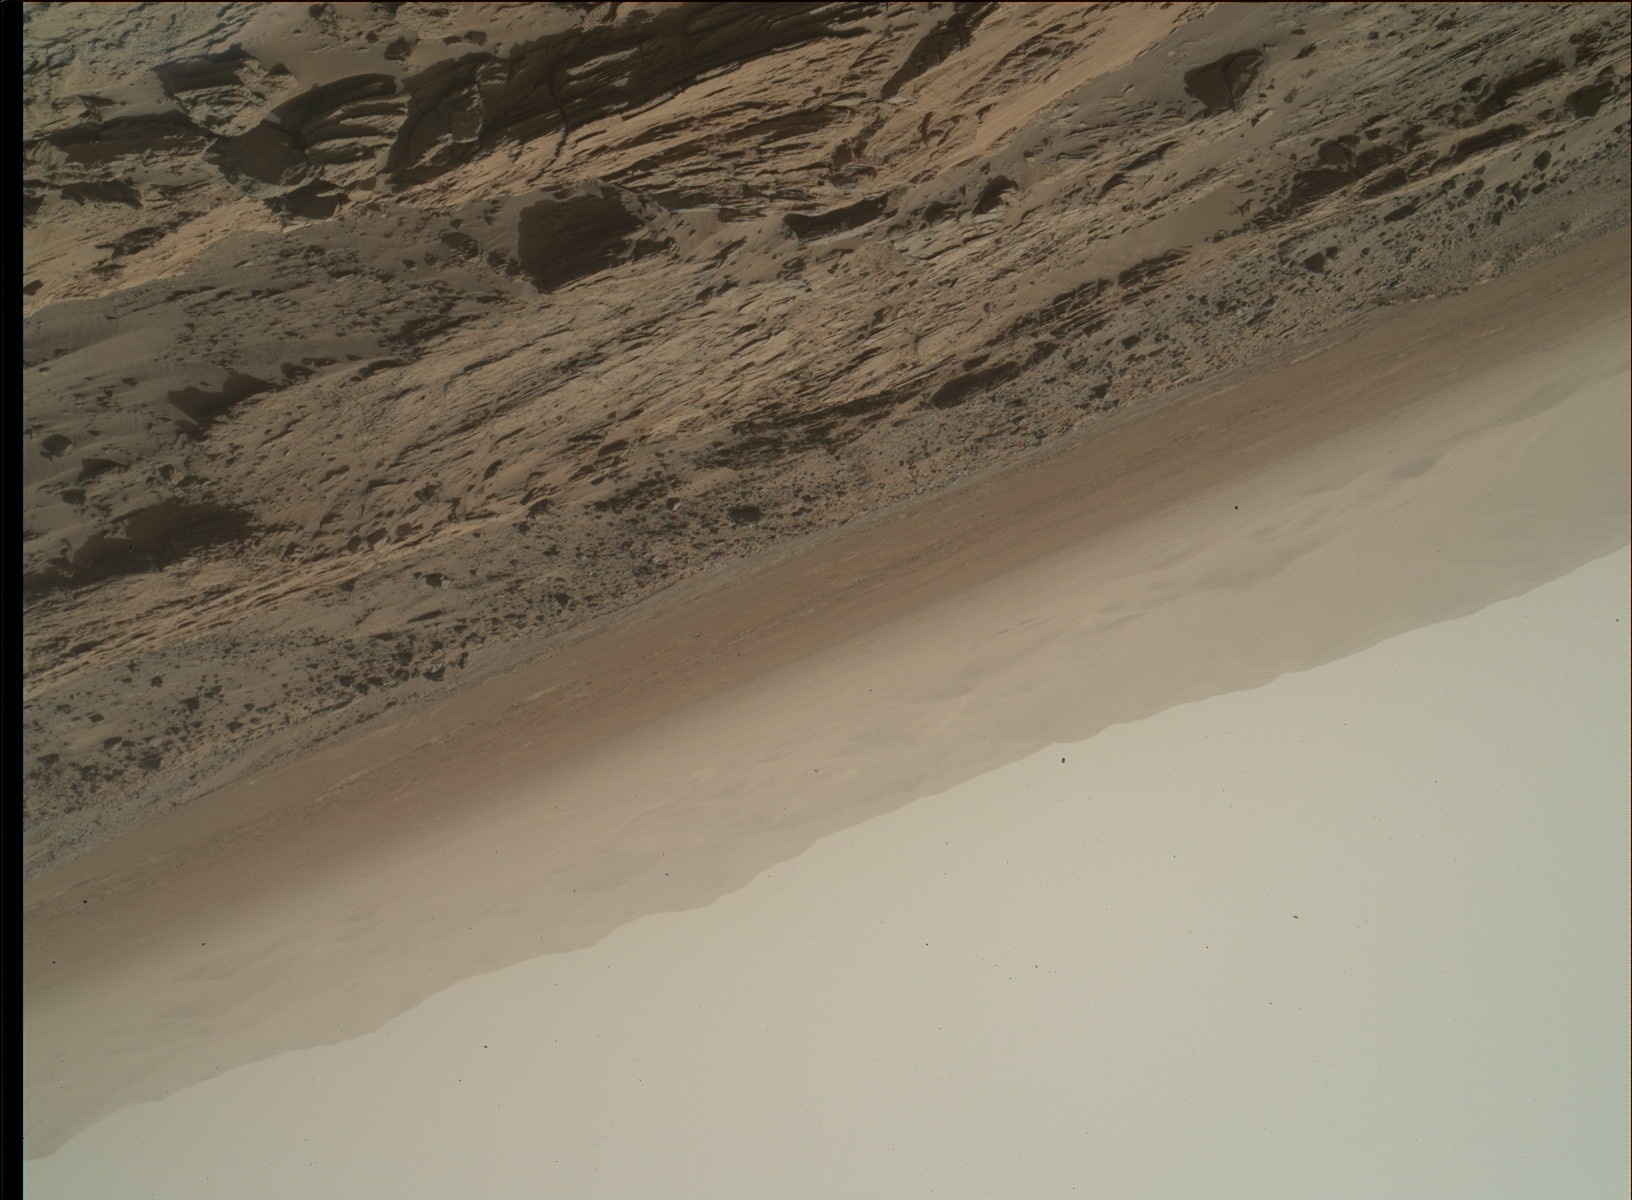 Nasa's Mars rover Curiosity acquired this image using its Mars Hand Lens Imager (MAHLI) on Sol 1093